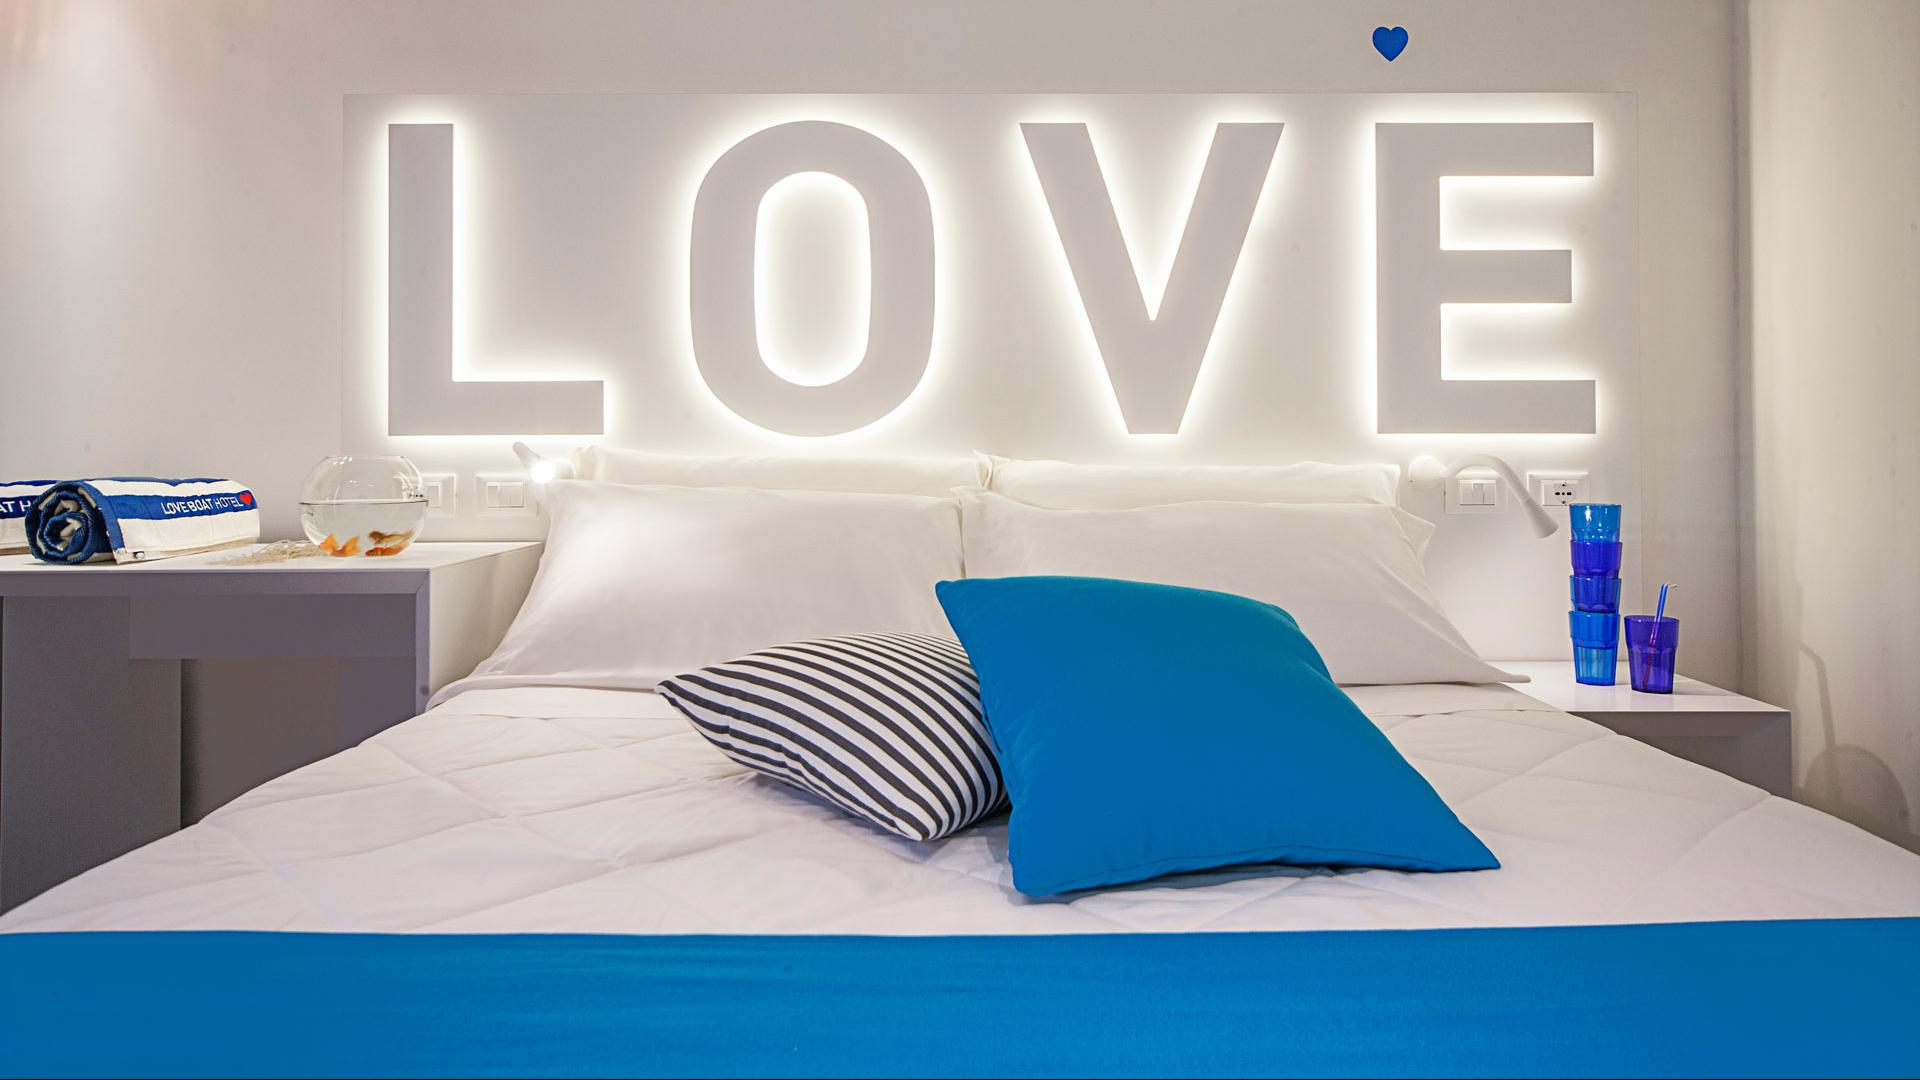 hotelloveboat it camere 005